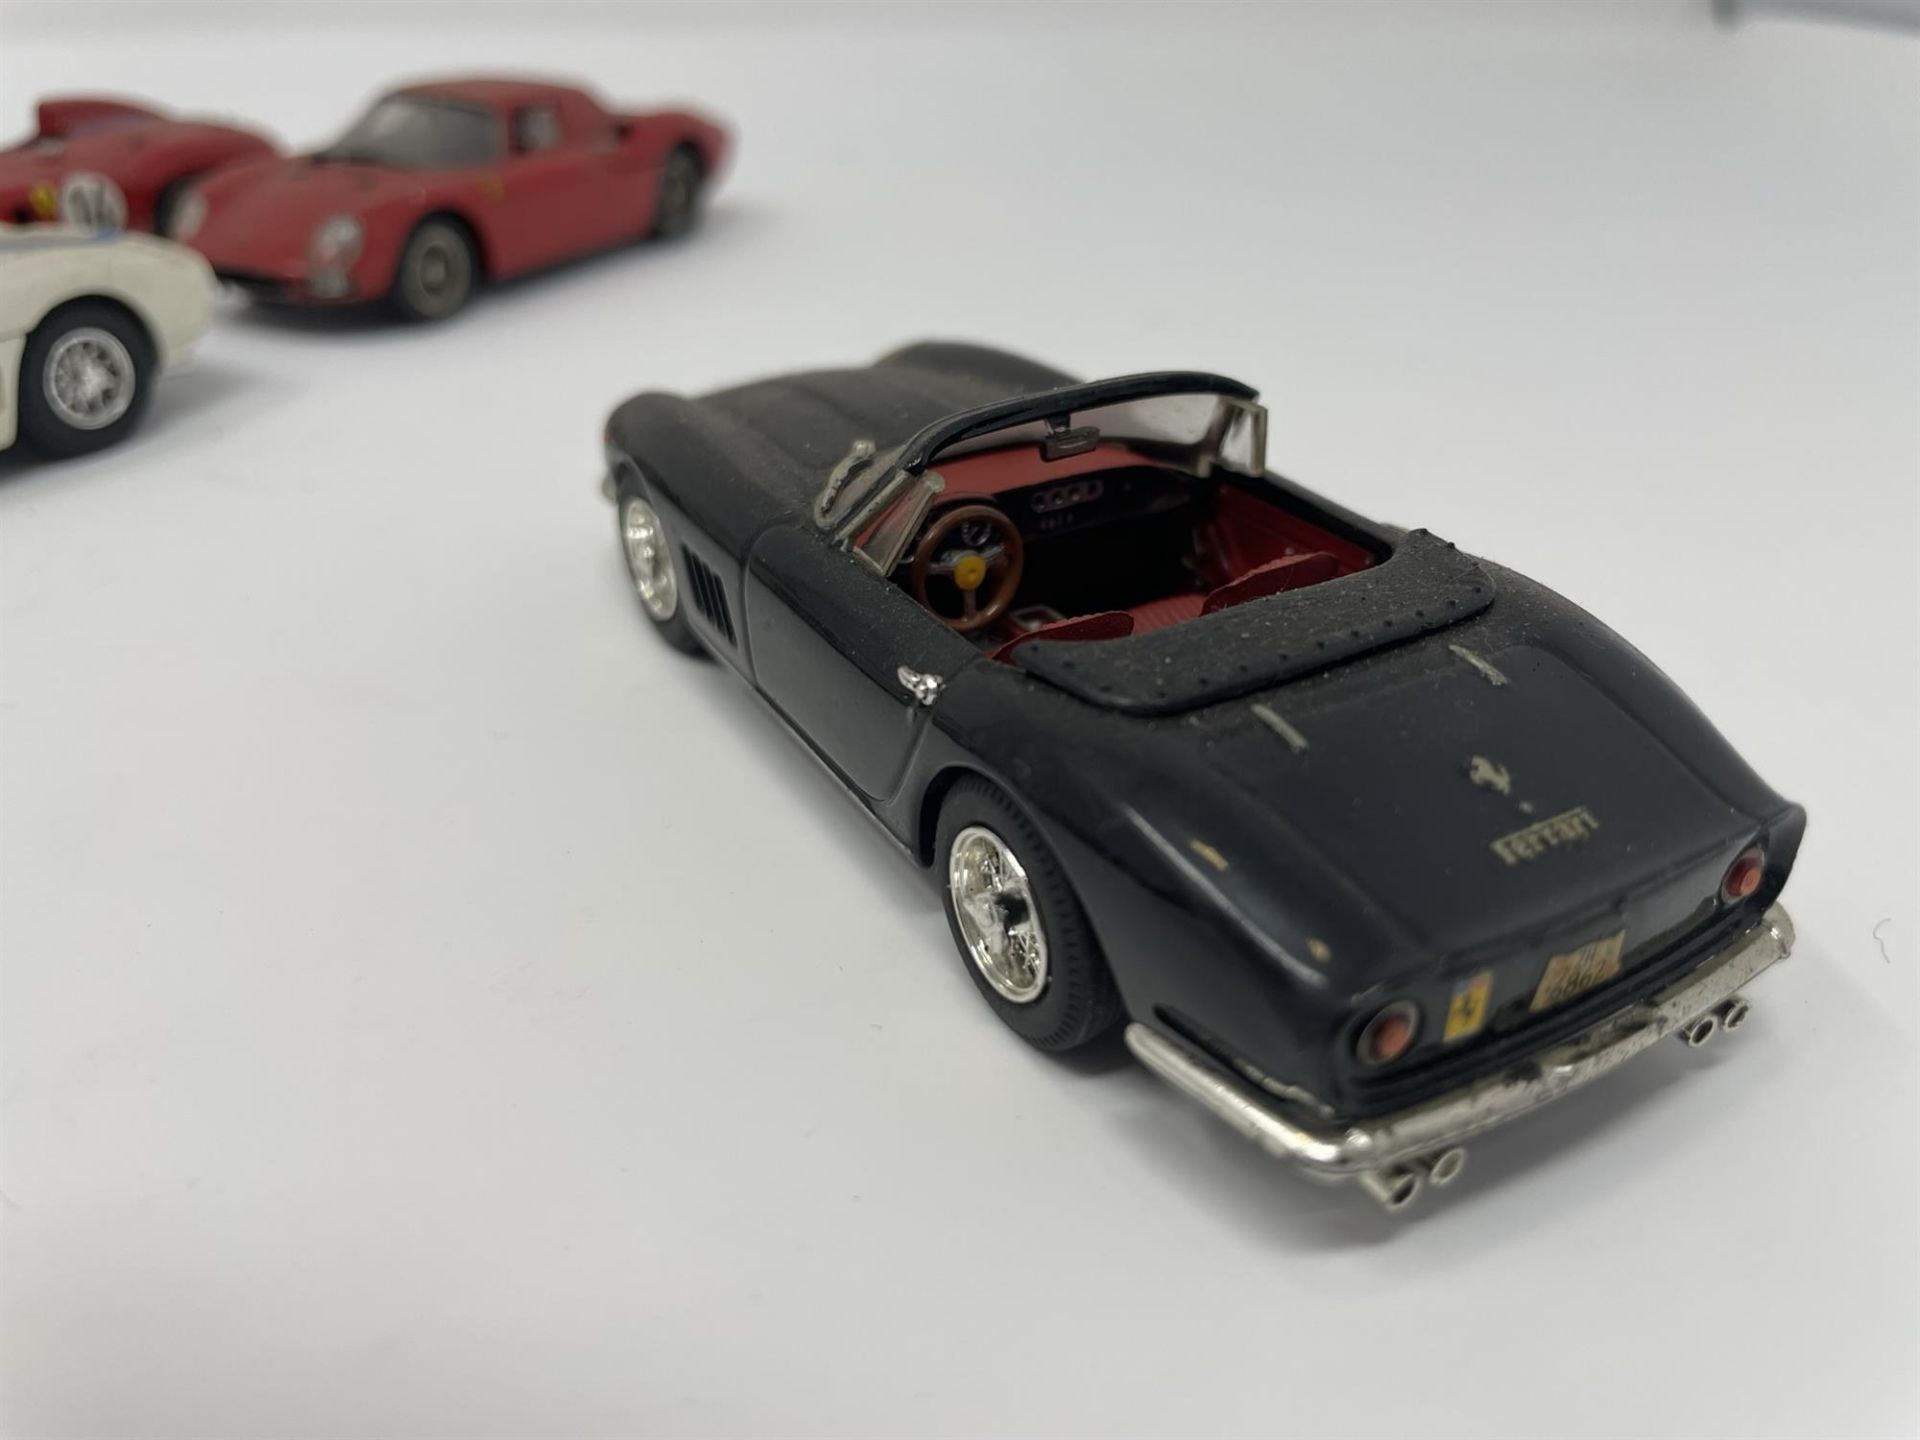 Ten 1/43rd Scale Ferrari Models from the 1950s, 60s and 70s - Image 10 of 10